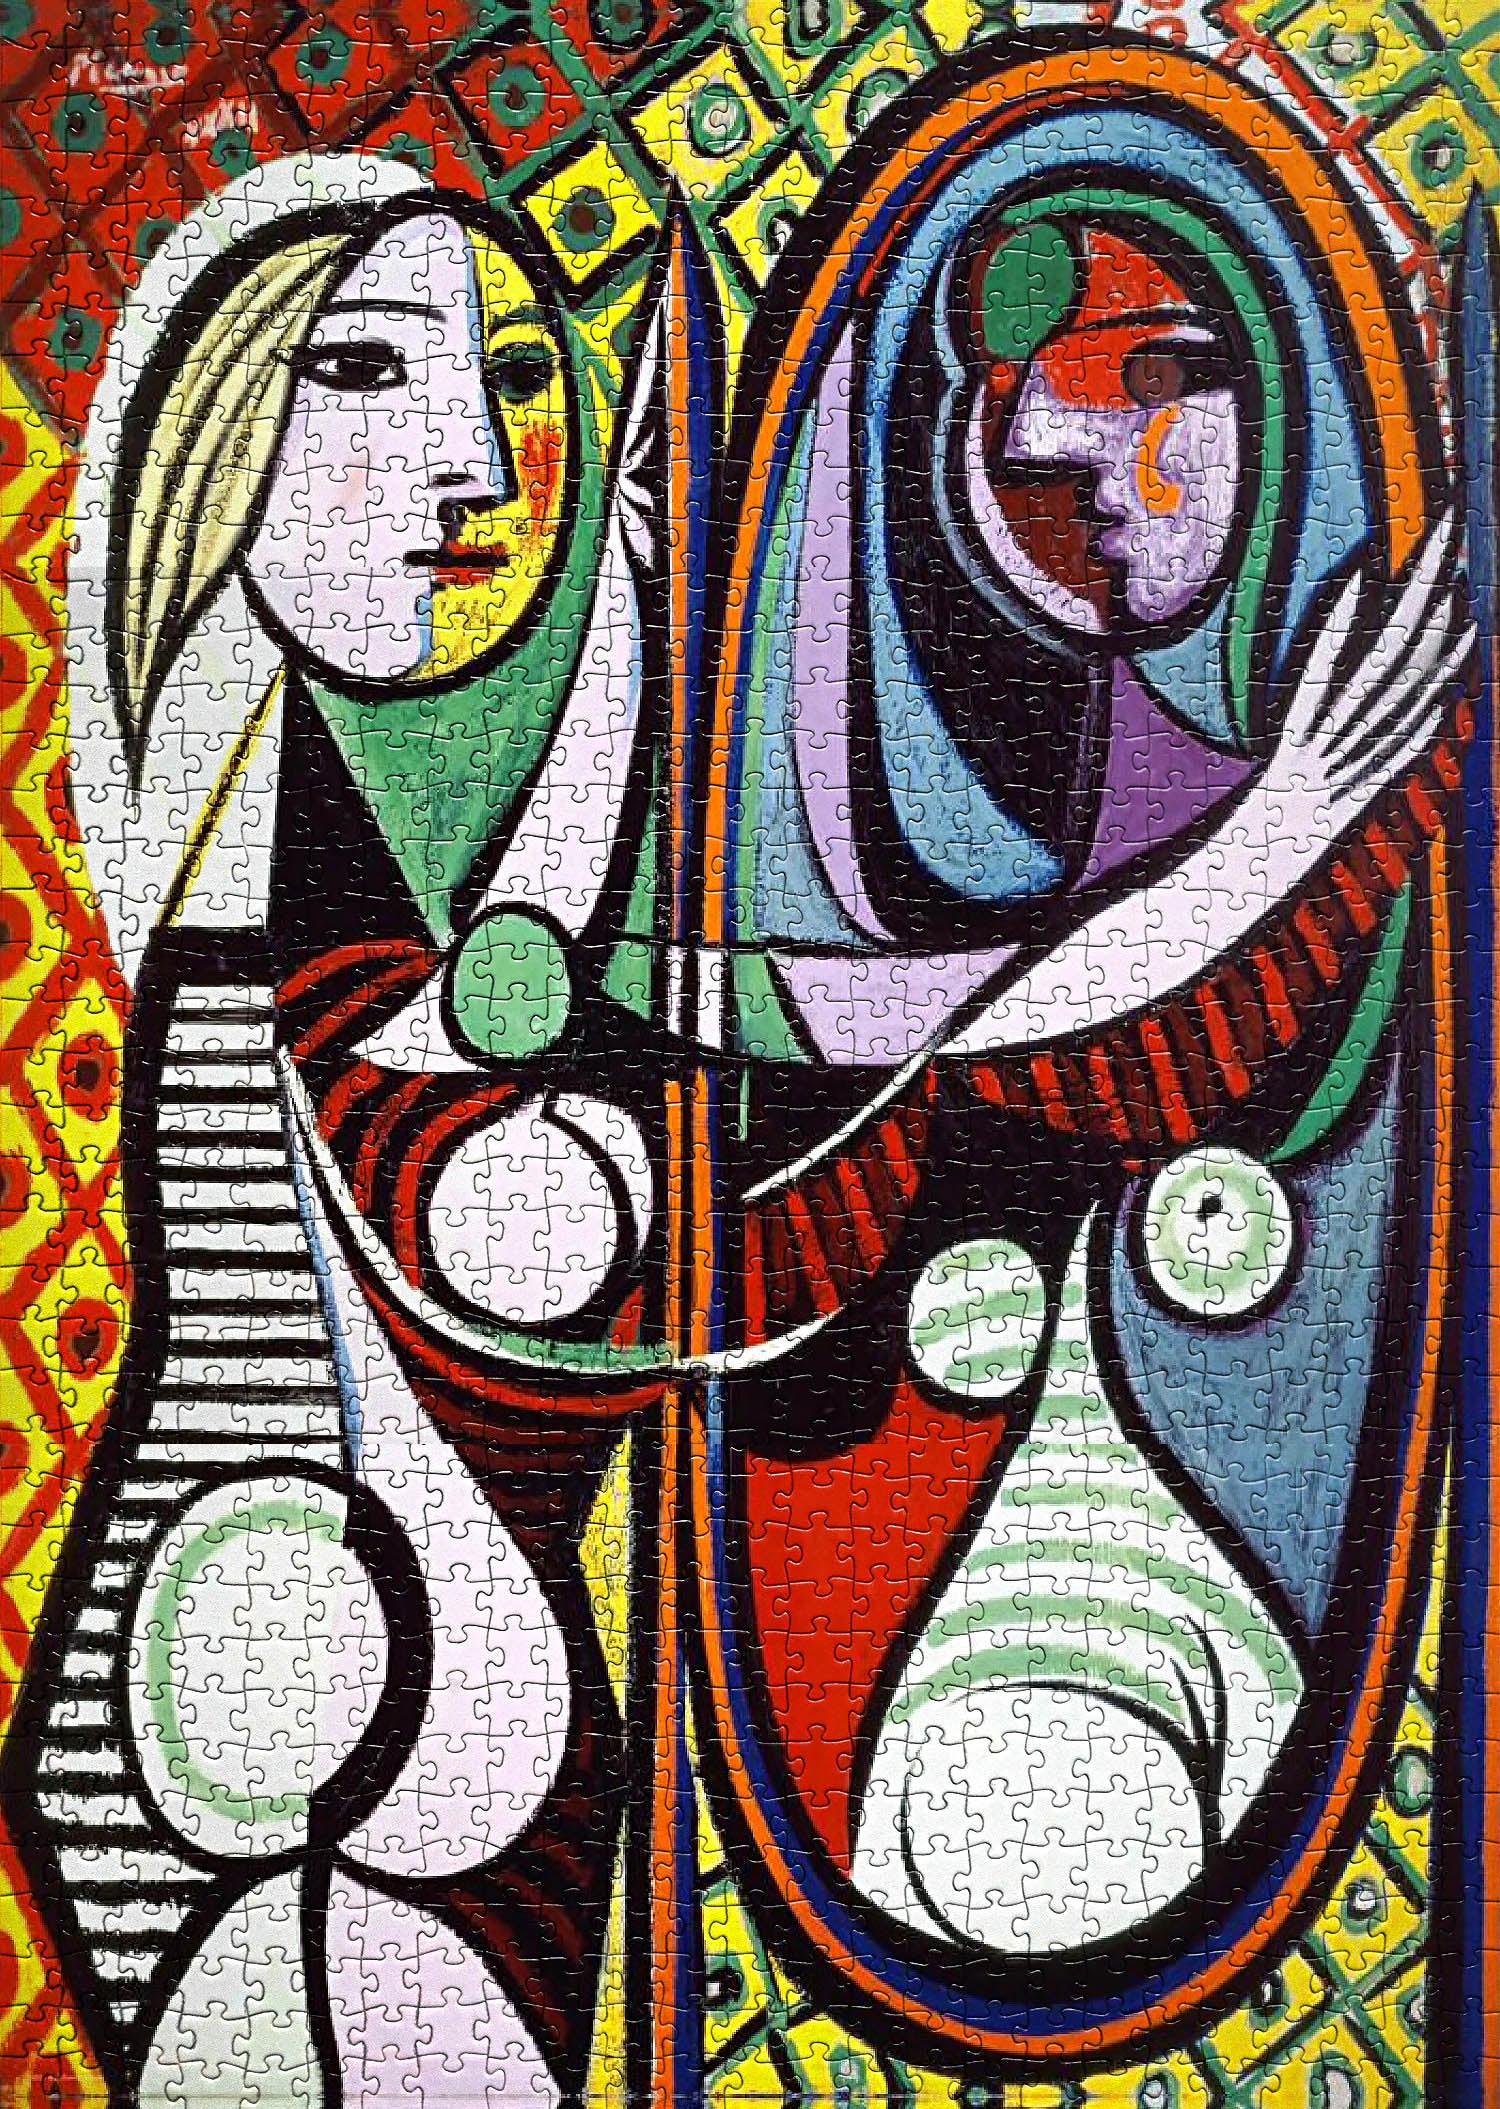 Pablo Picasso's Girl Before A Mirror 1000-piece jigsaw puzzle